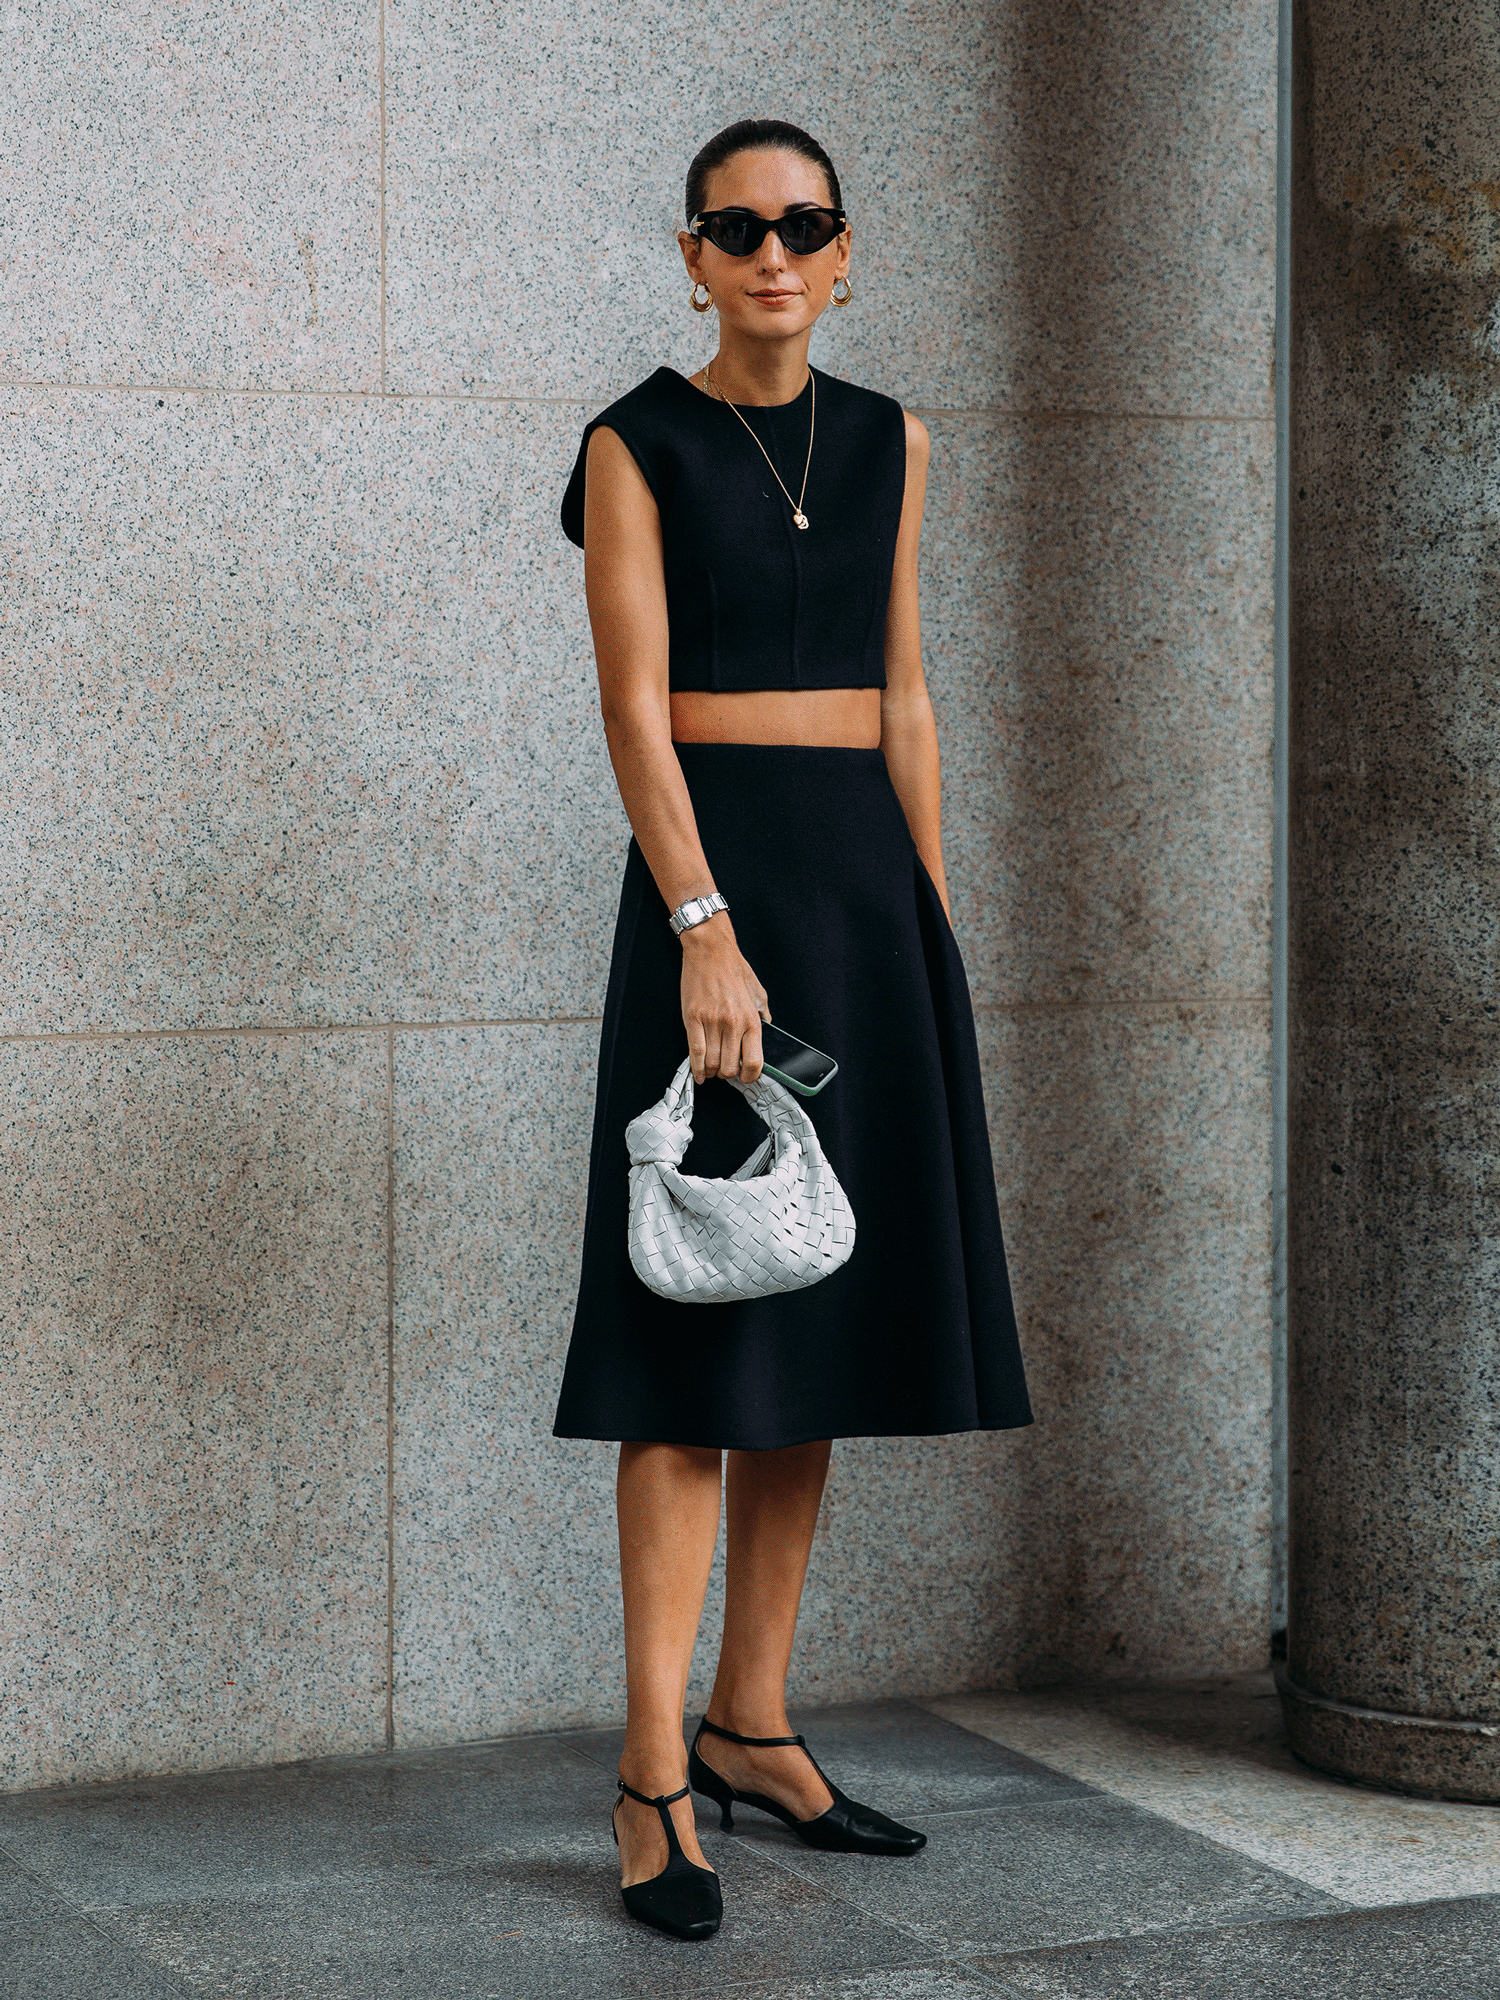 How to wear black in summer